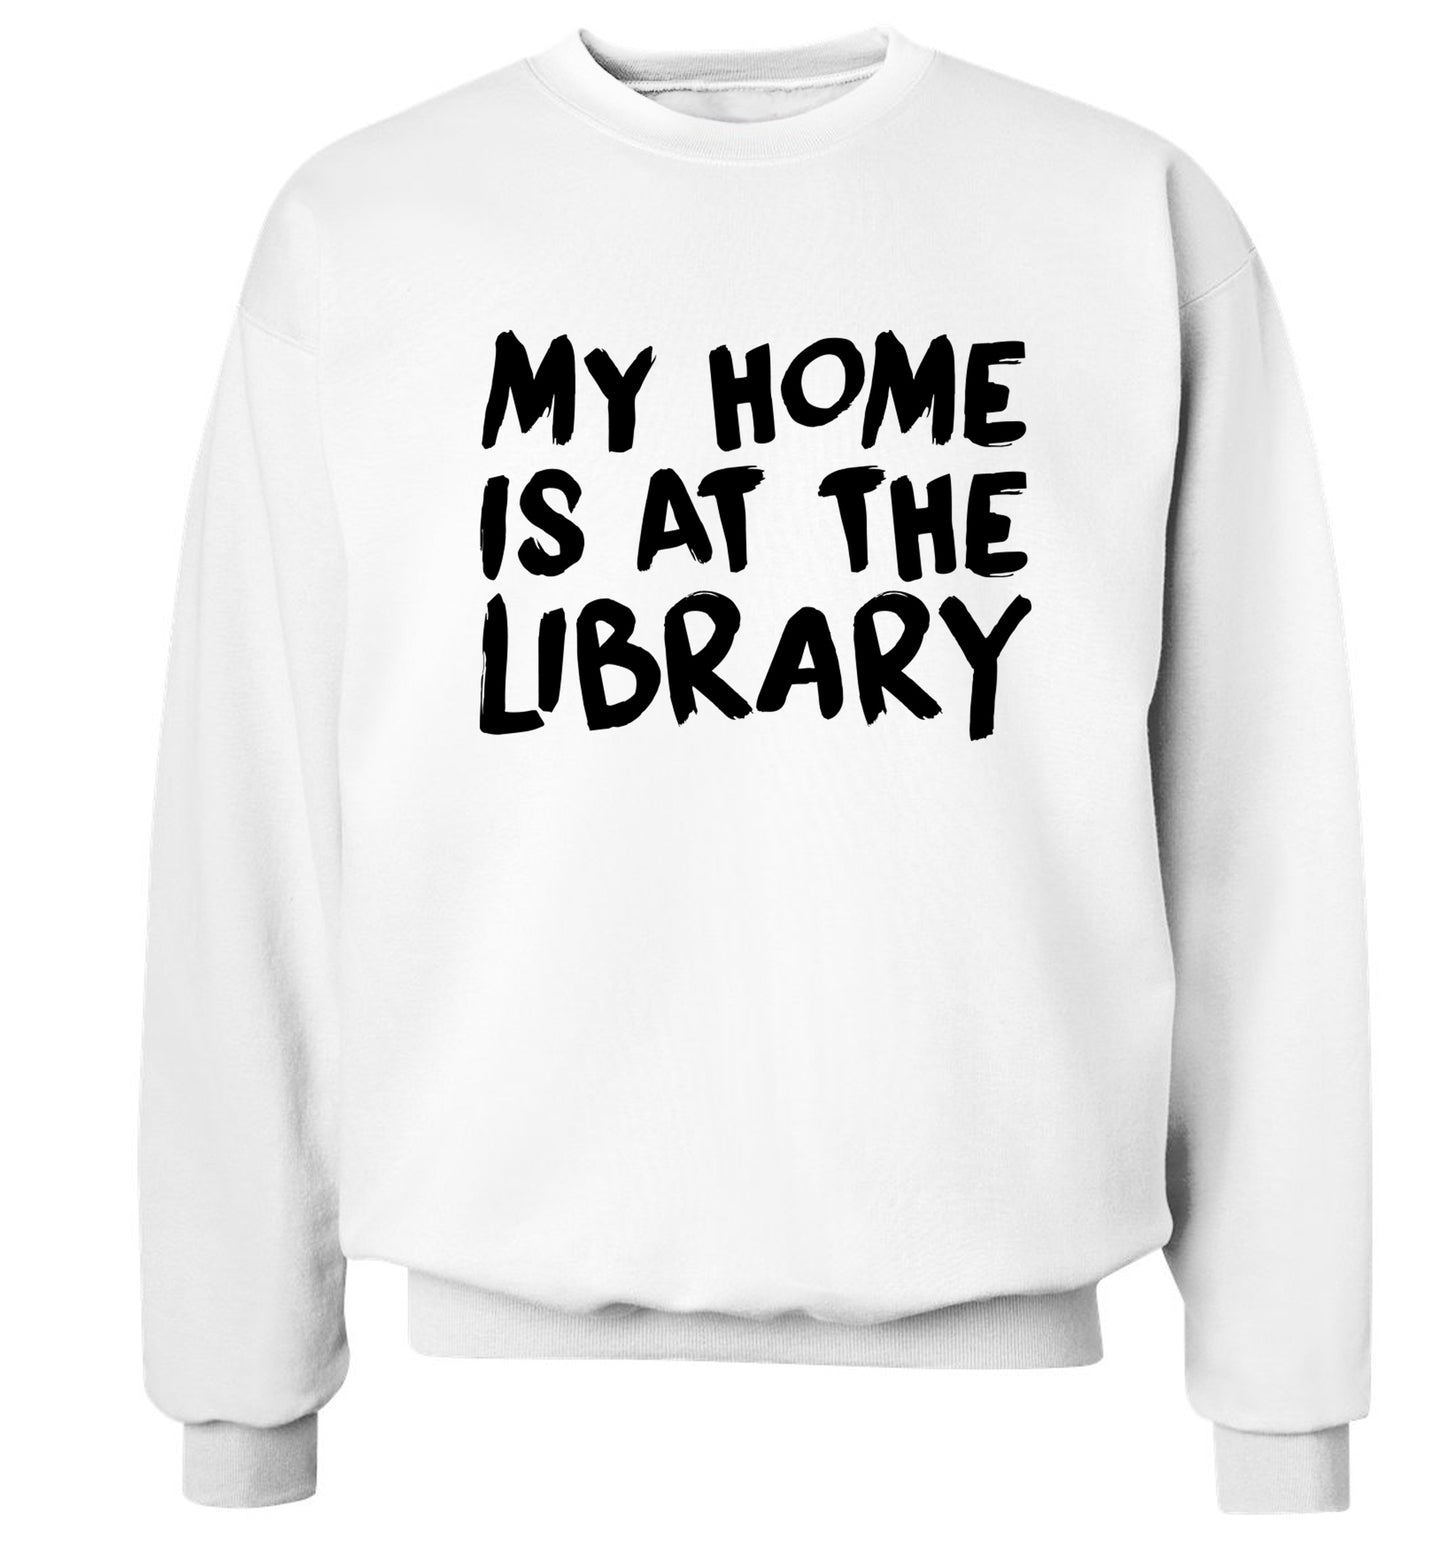 My home is at the library Adult's unisex white Sweater 2XL